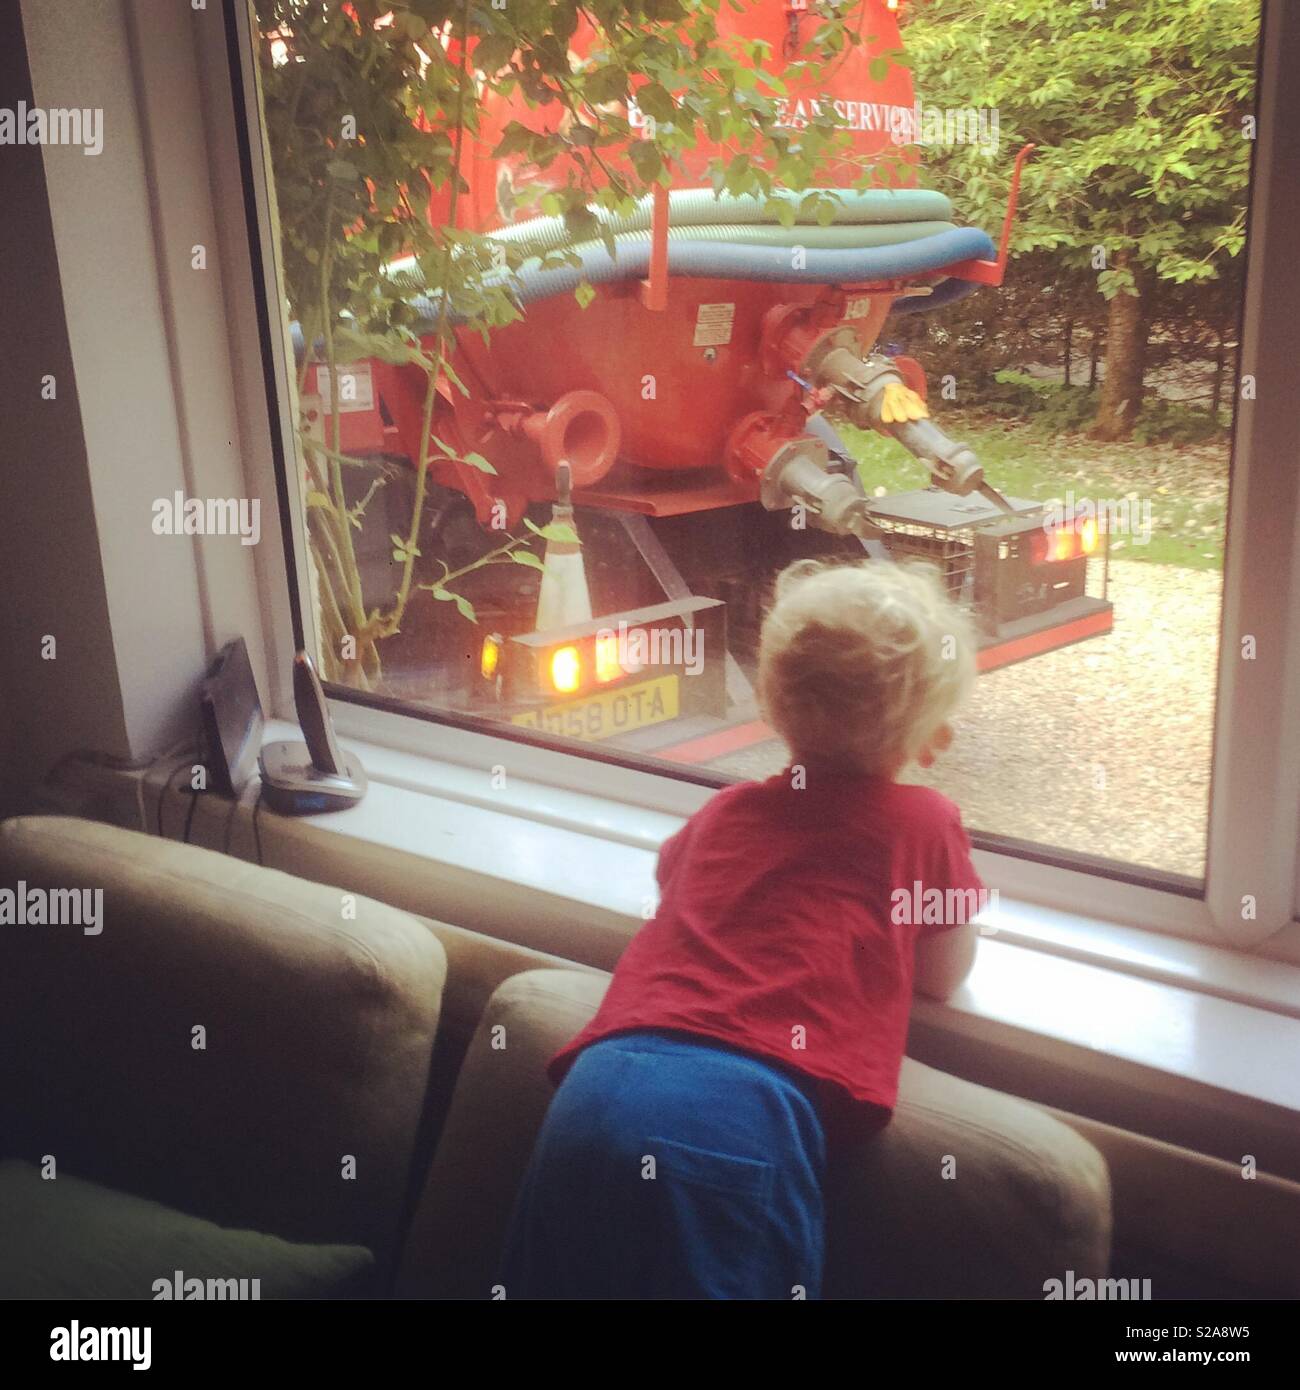 Two year old boy watching a sewage tanker truck through a window, Medstead, Hampshire, England. Stock Photo